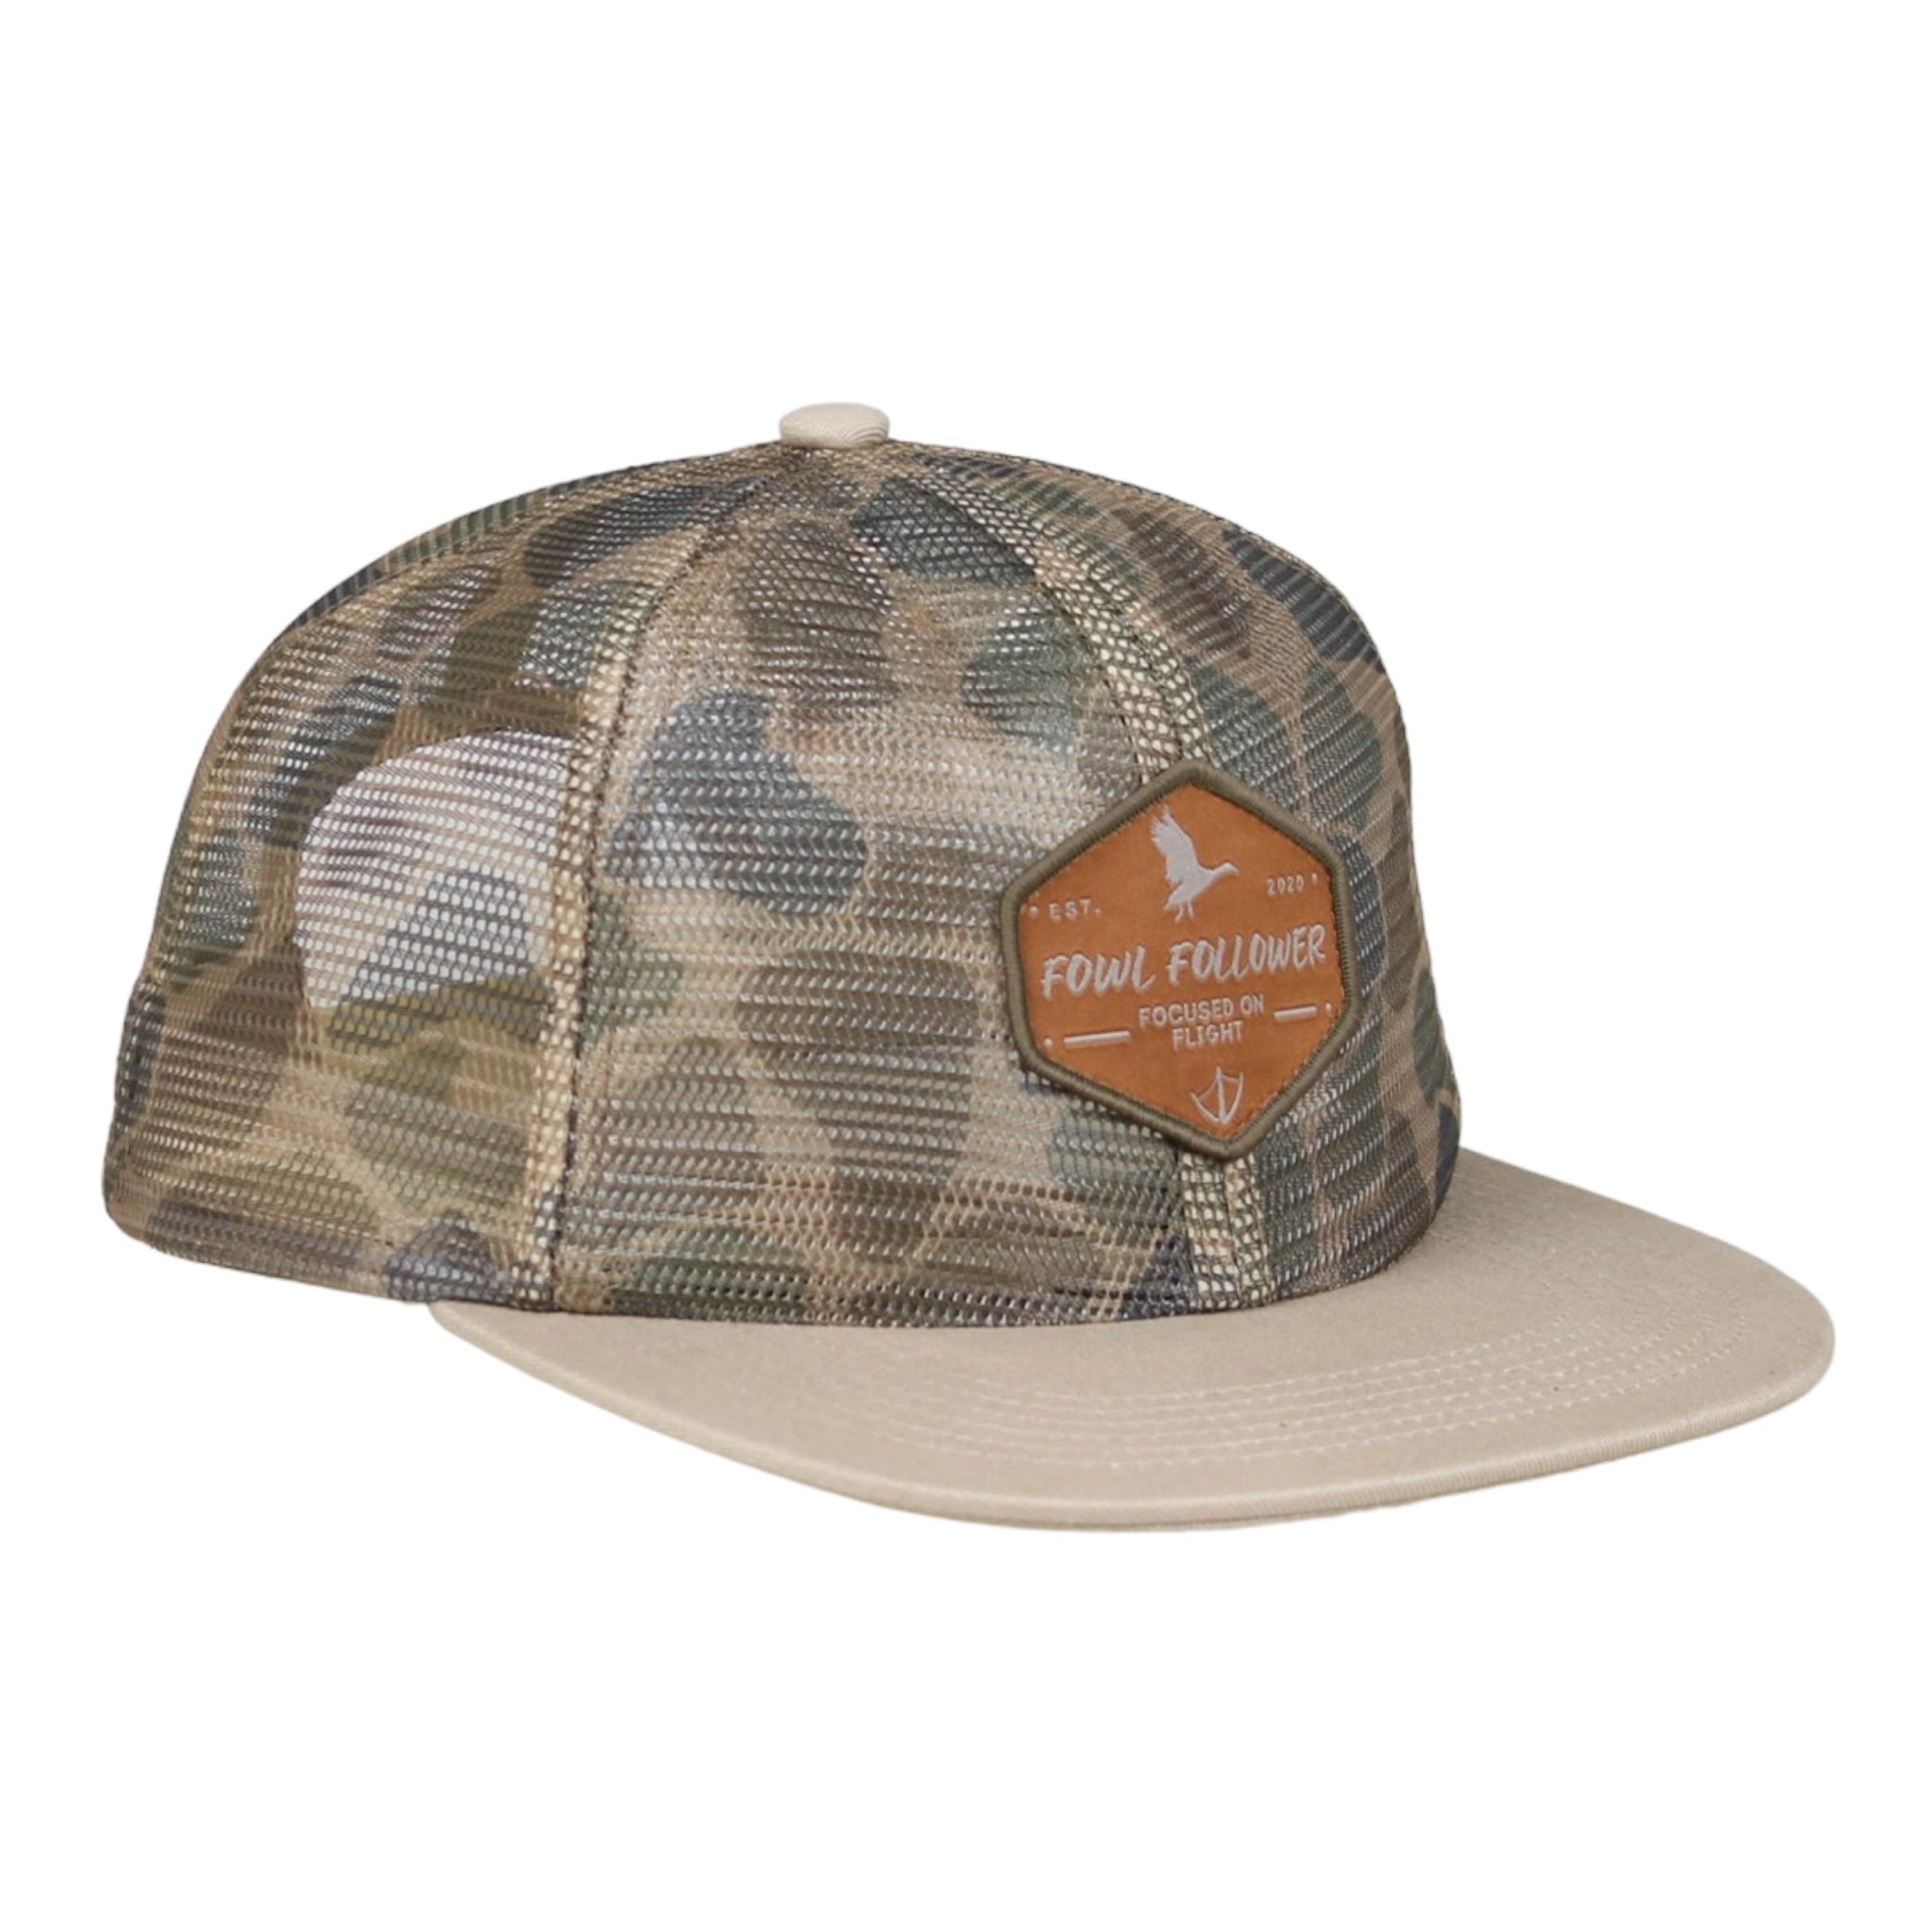 A Fowl Follower Mesh Camo Hat with a leather patch on the front.